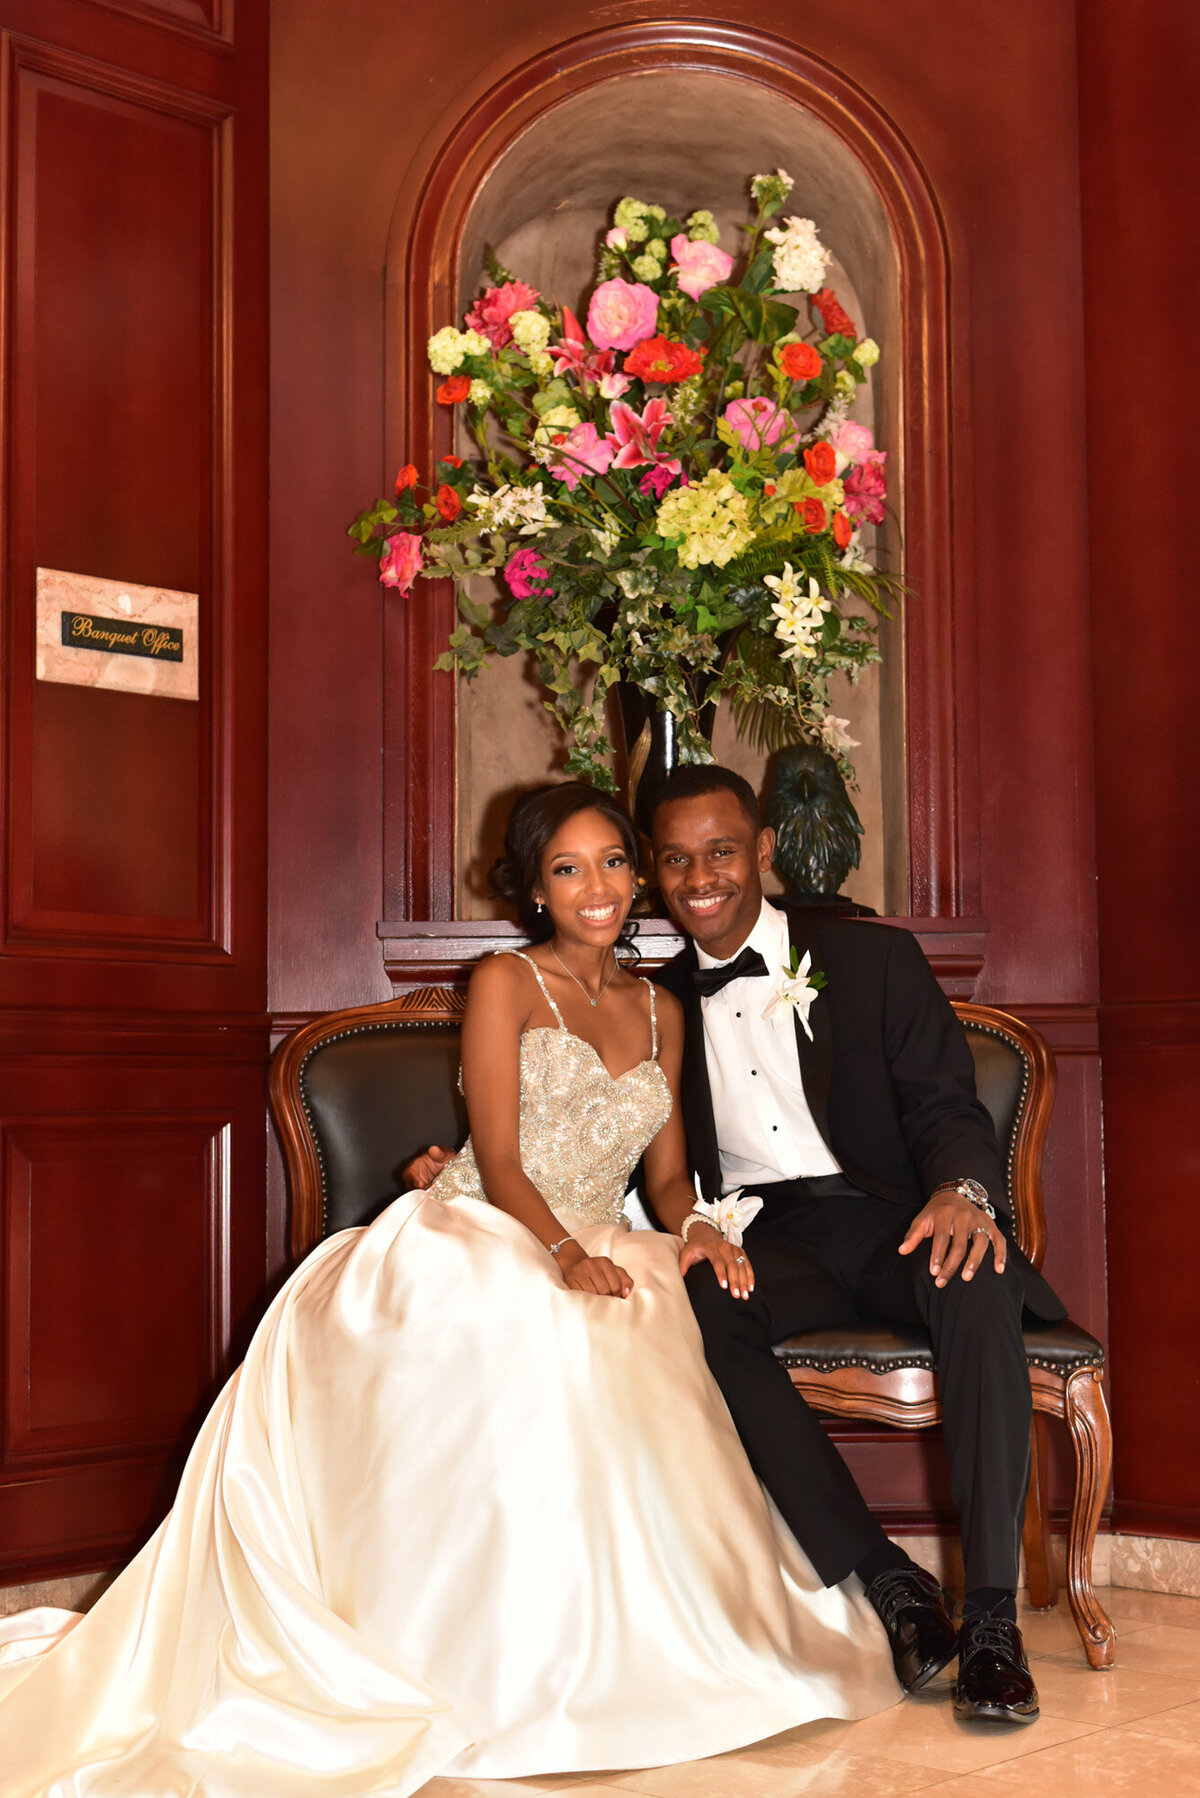 Bride and groom smiling while sitting down in a sofa that has florals behind